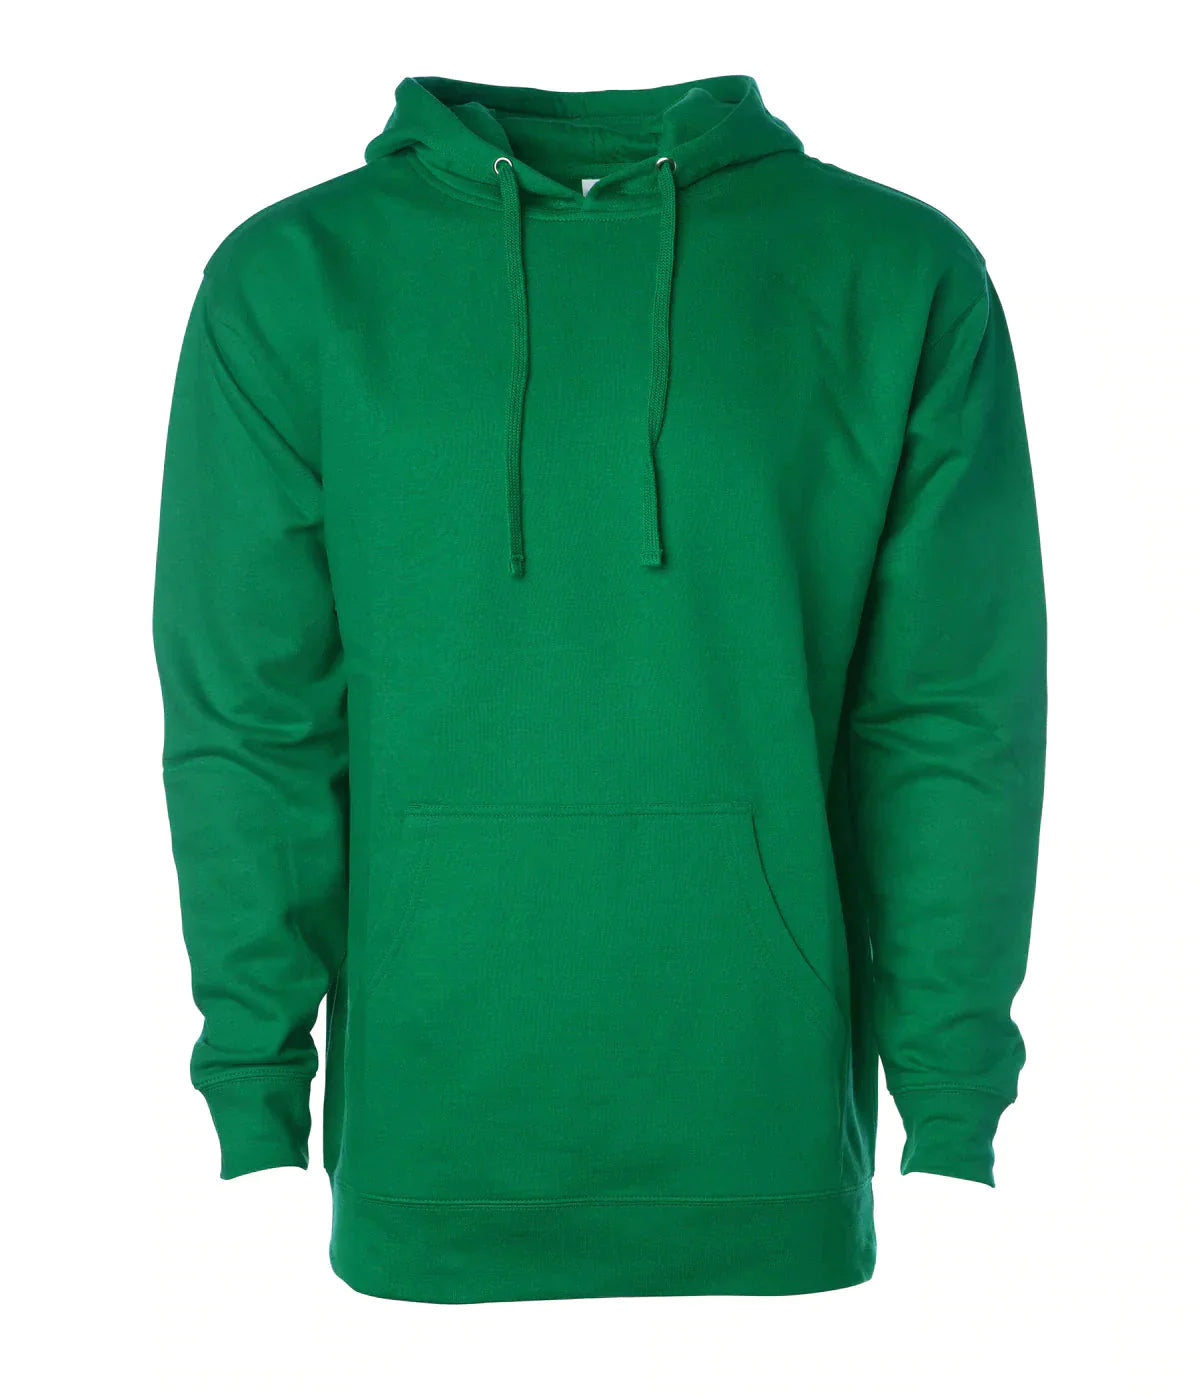 SS4500 Midweight Hooded Pullover Sweatshirt - Kelly Green